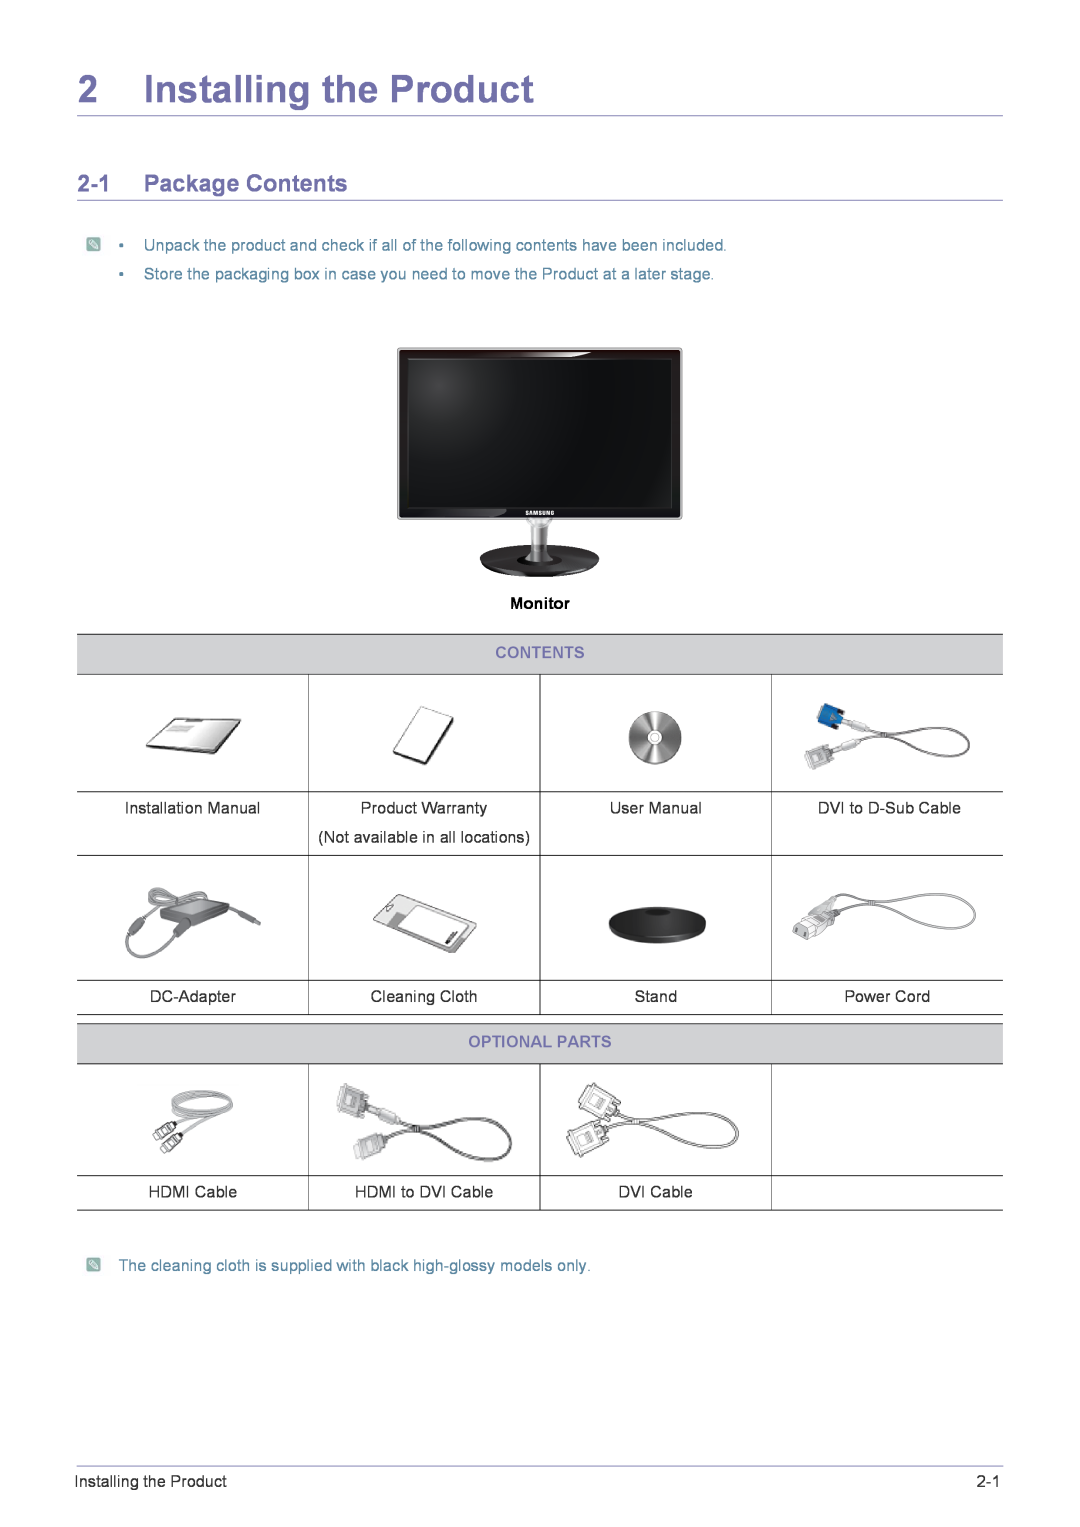 Samsung PX2370 user manual Installing the Product, Package Contents, Monitor, Optional Parts 